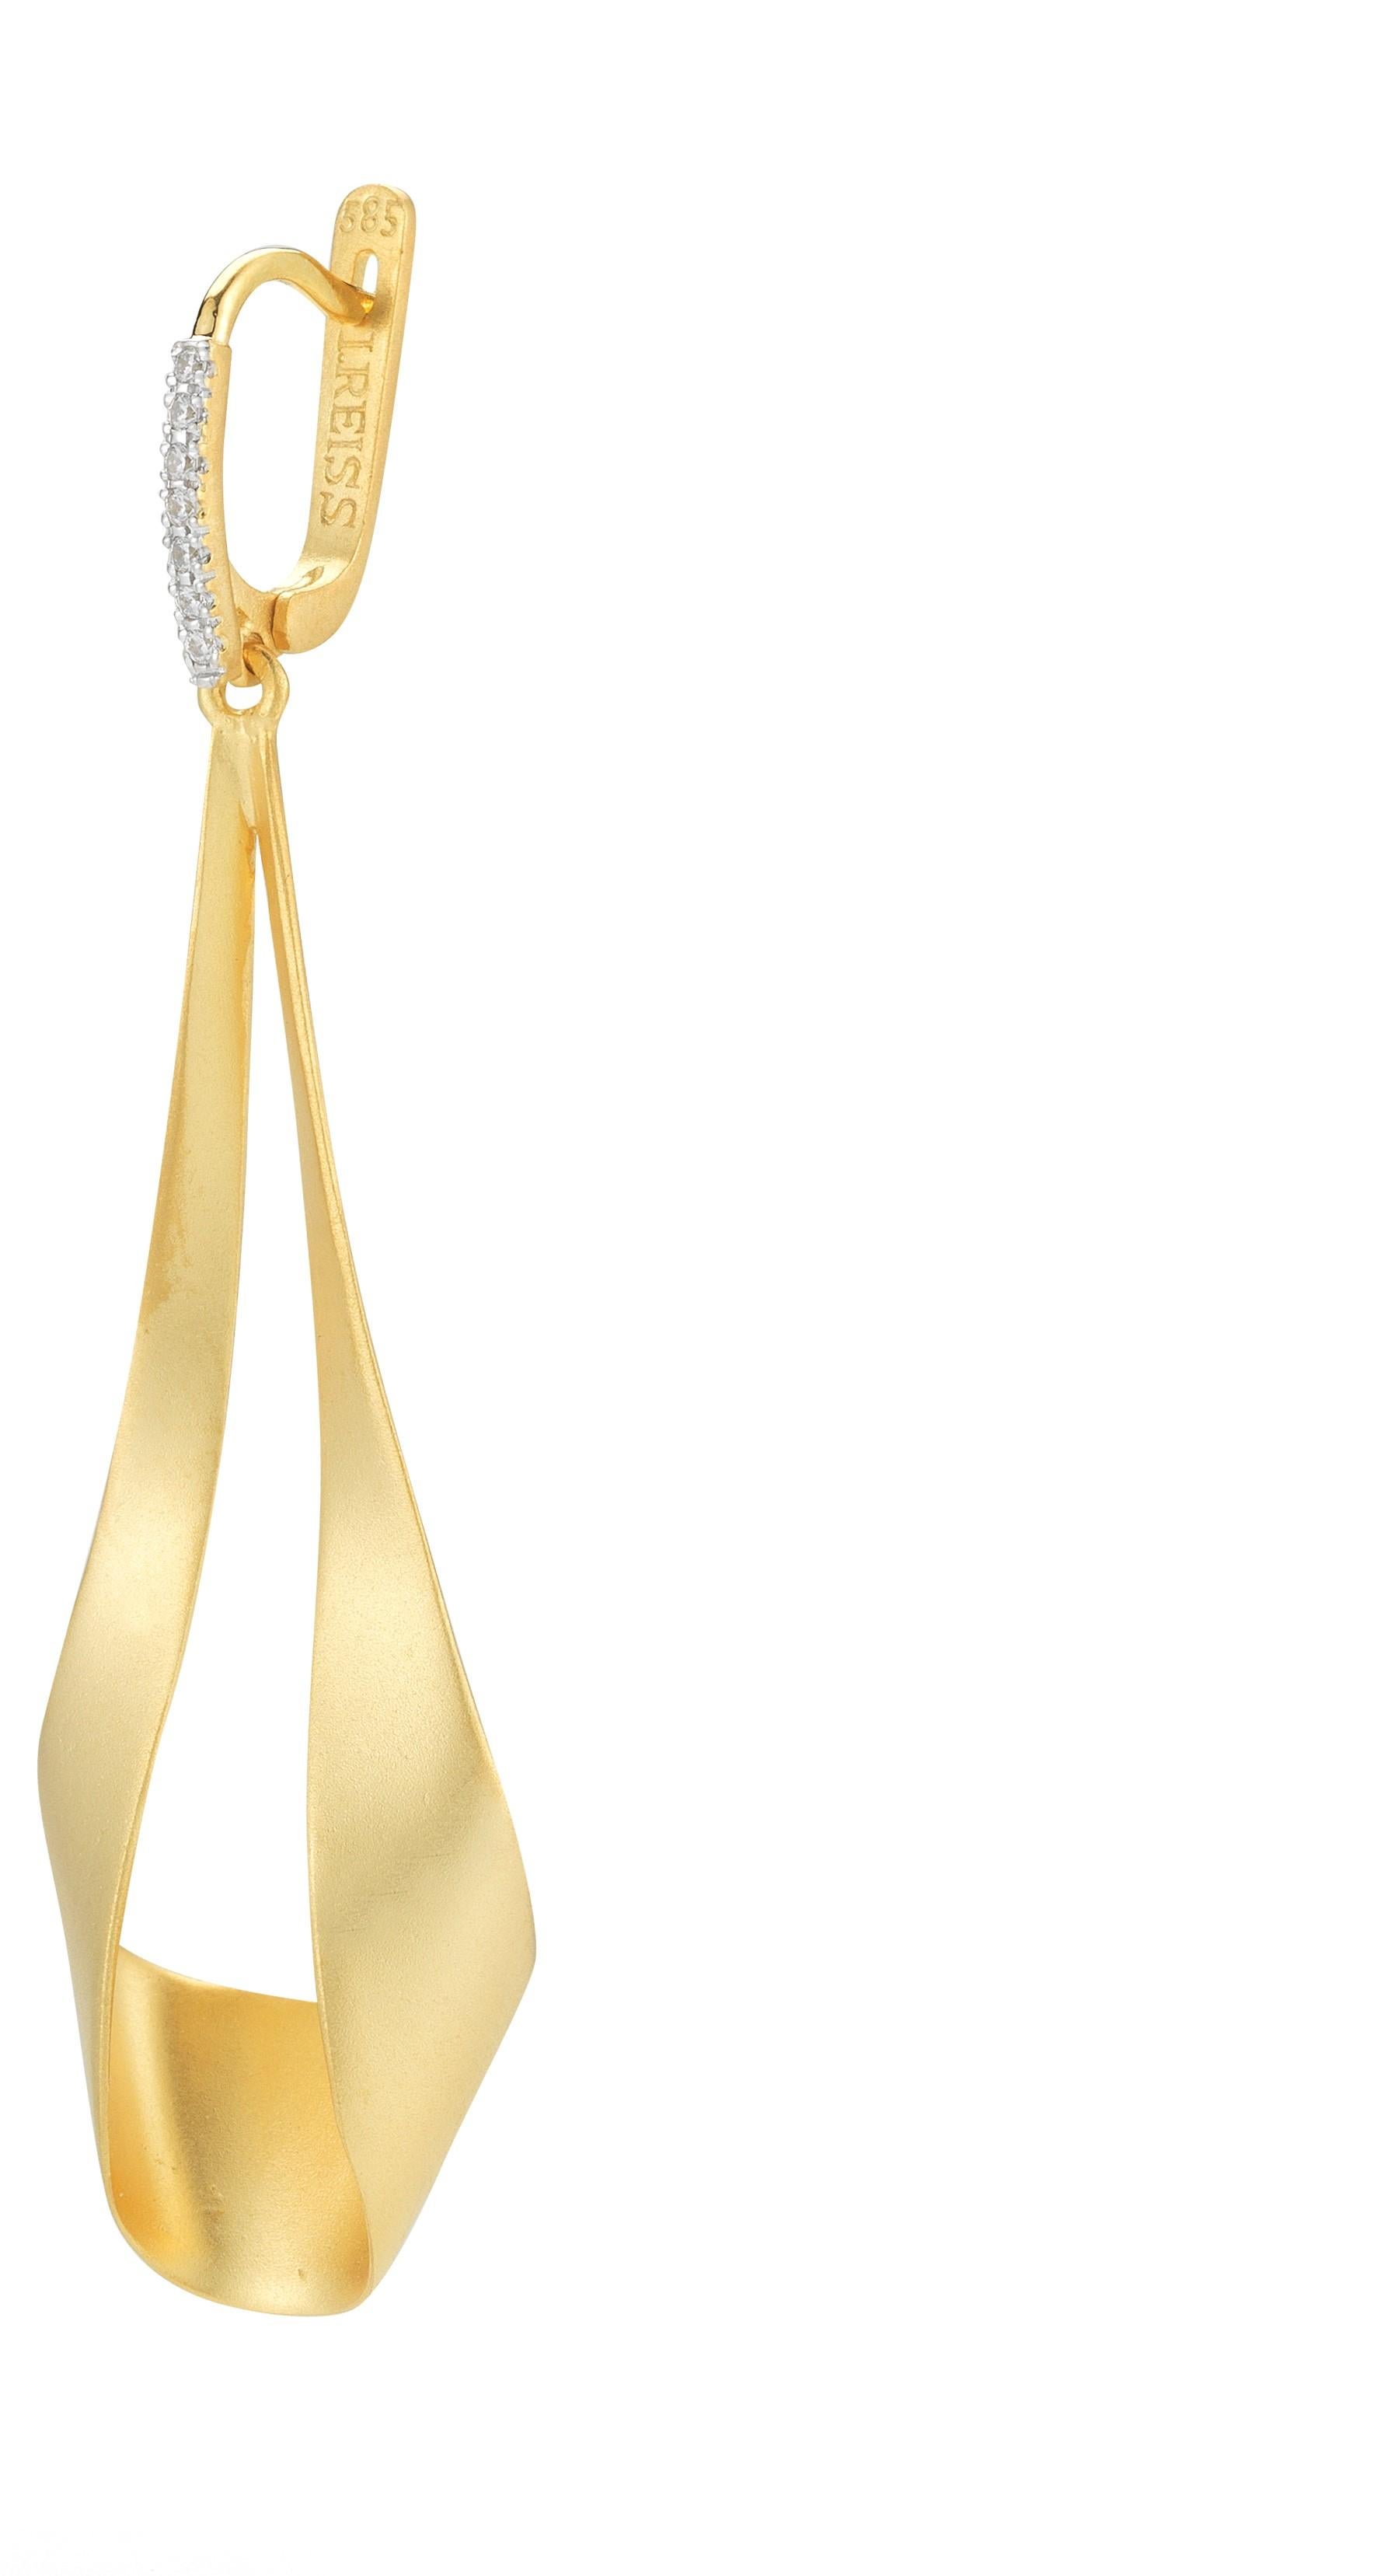 14 Karat Yellow Gold Hand-Crafted Satin-Finished Drop Earrings, Set with 0.11 Carats of Pave Set Diamond Lever Back Closures.
